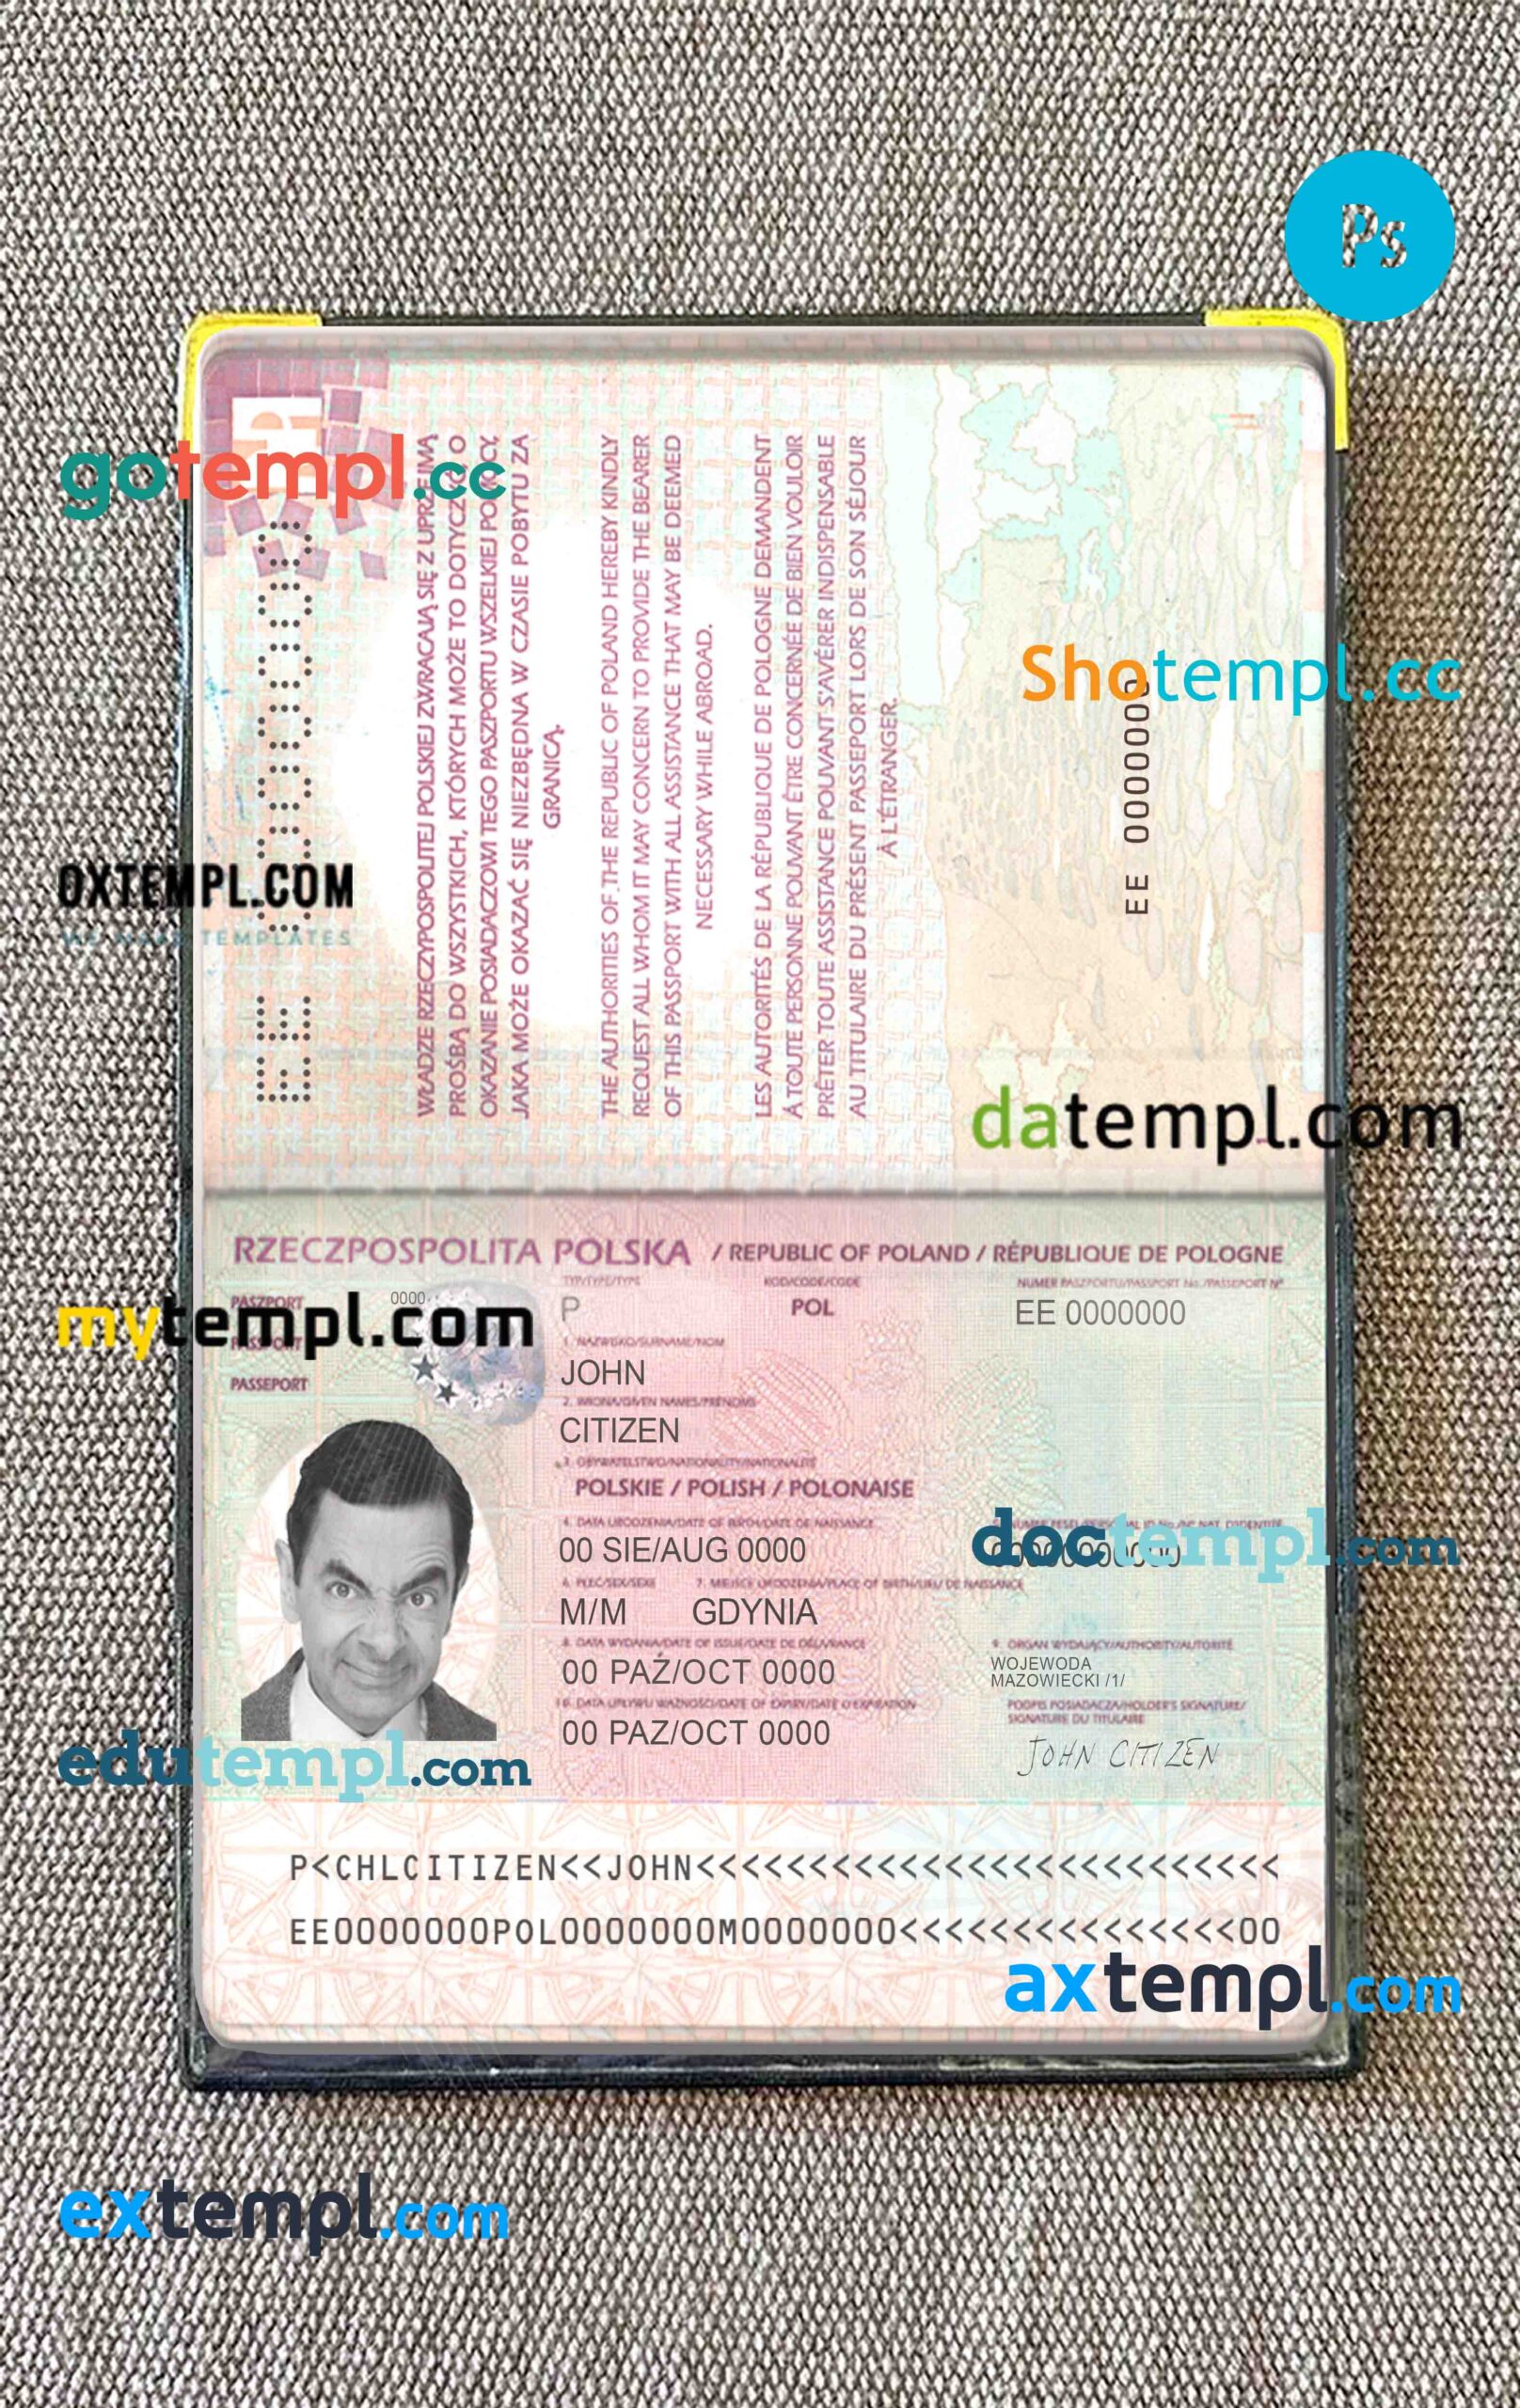 Poland passport PSD files, scan and photograghed image, 2 in 1